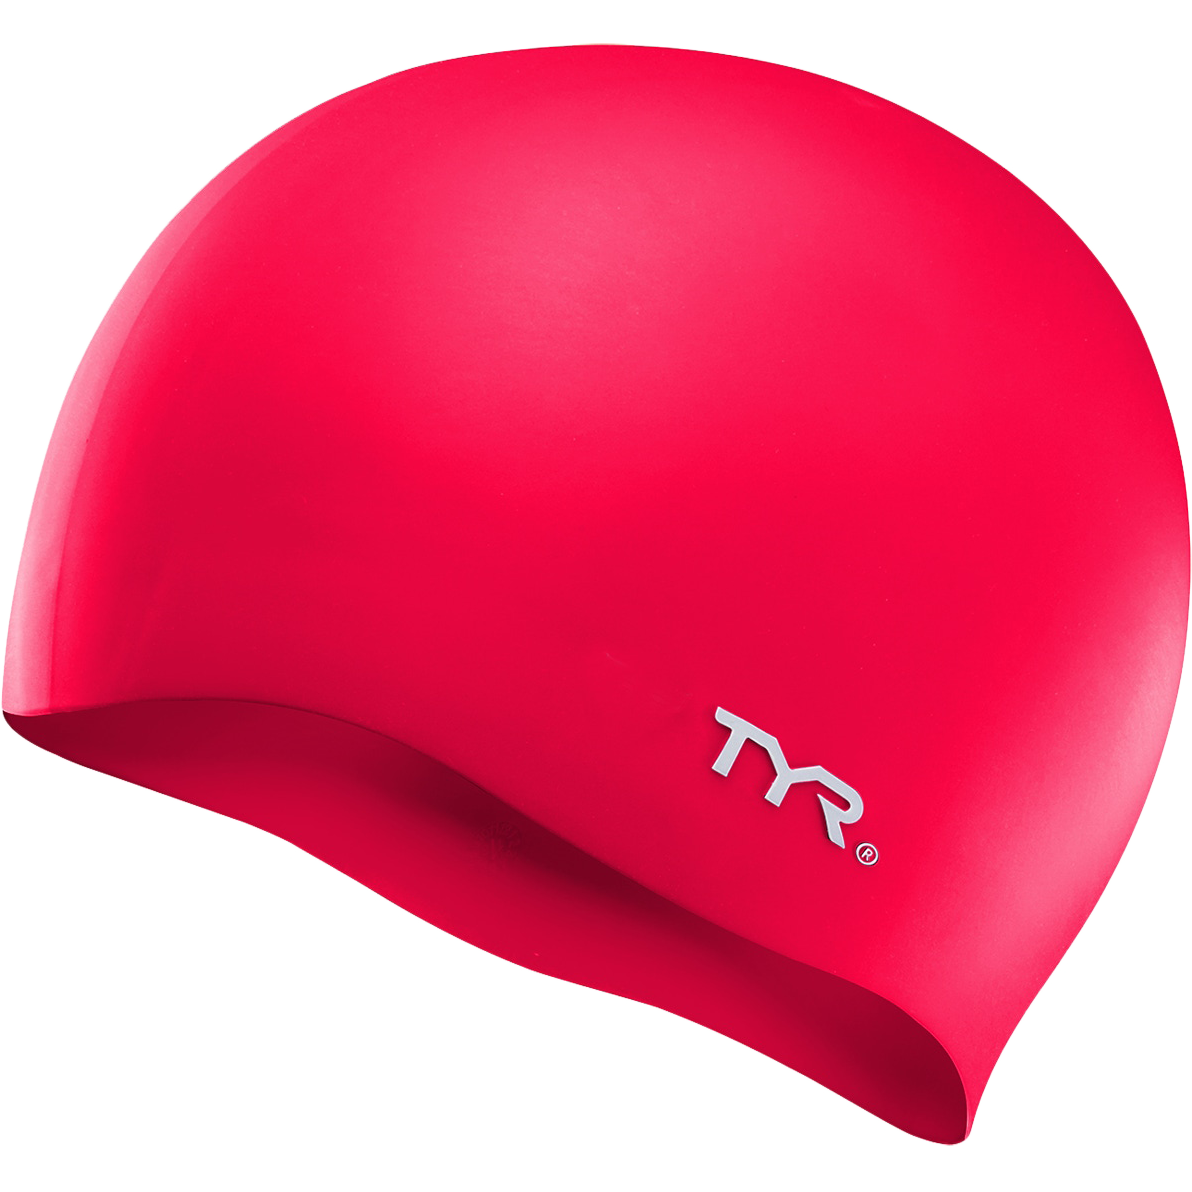 Wrinkle-Free Silicone Cap - Red alternate view